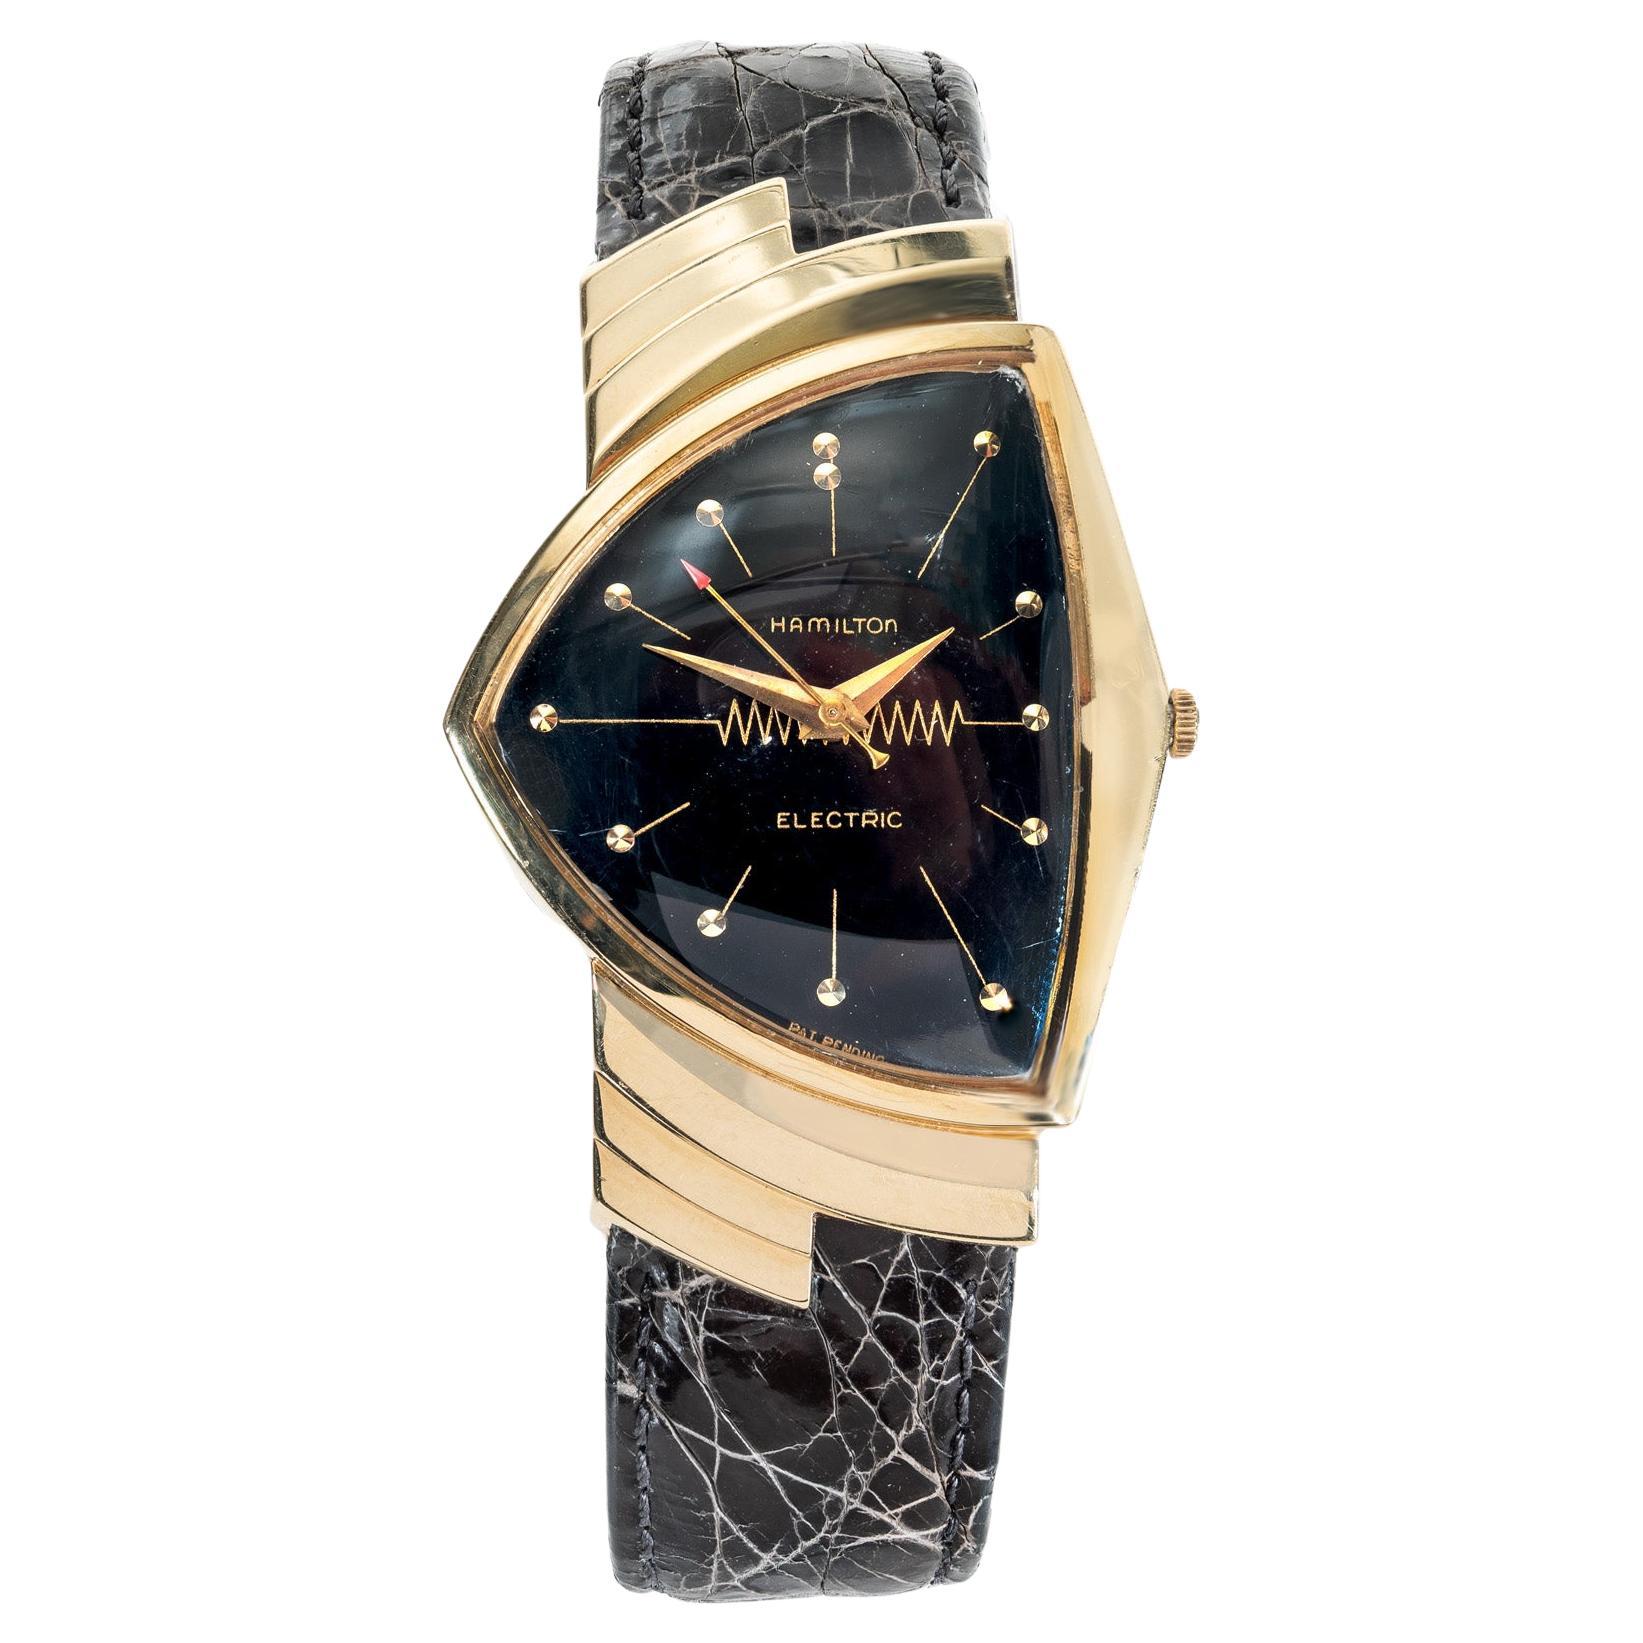 Hamilton Yellow Gold Electric Pacer 500 Wristwatch For Sale